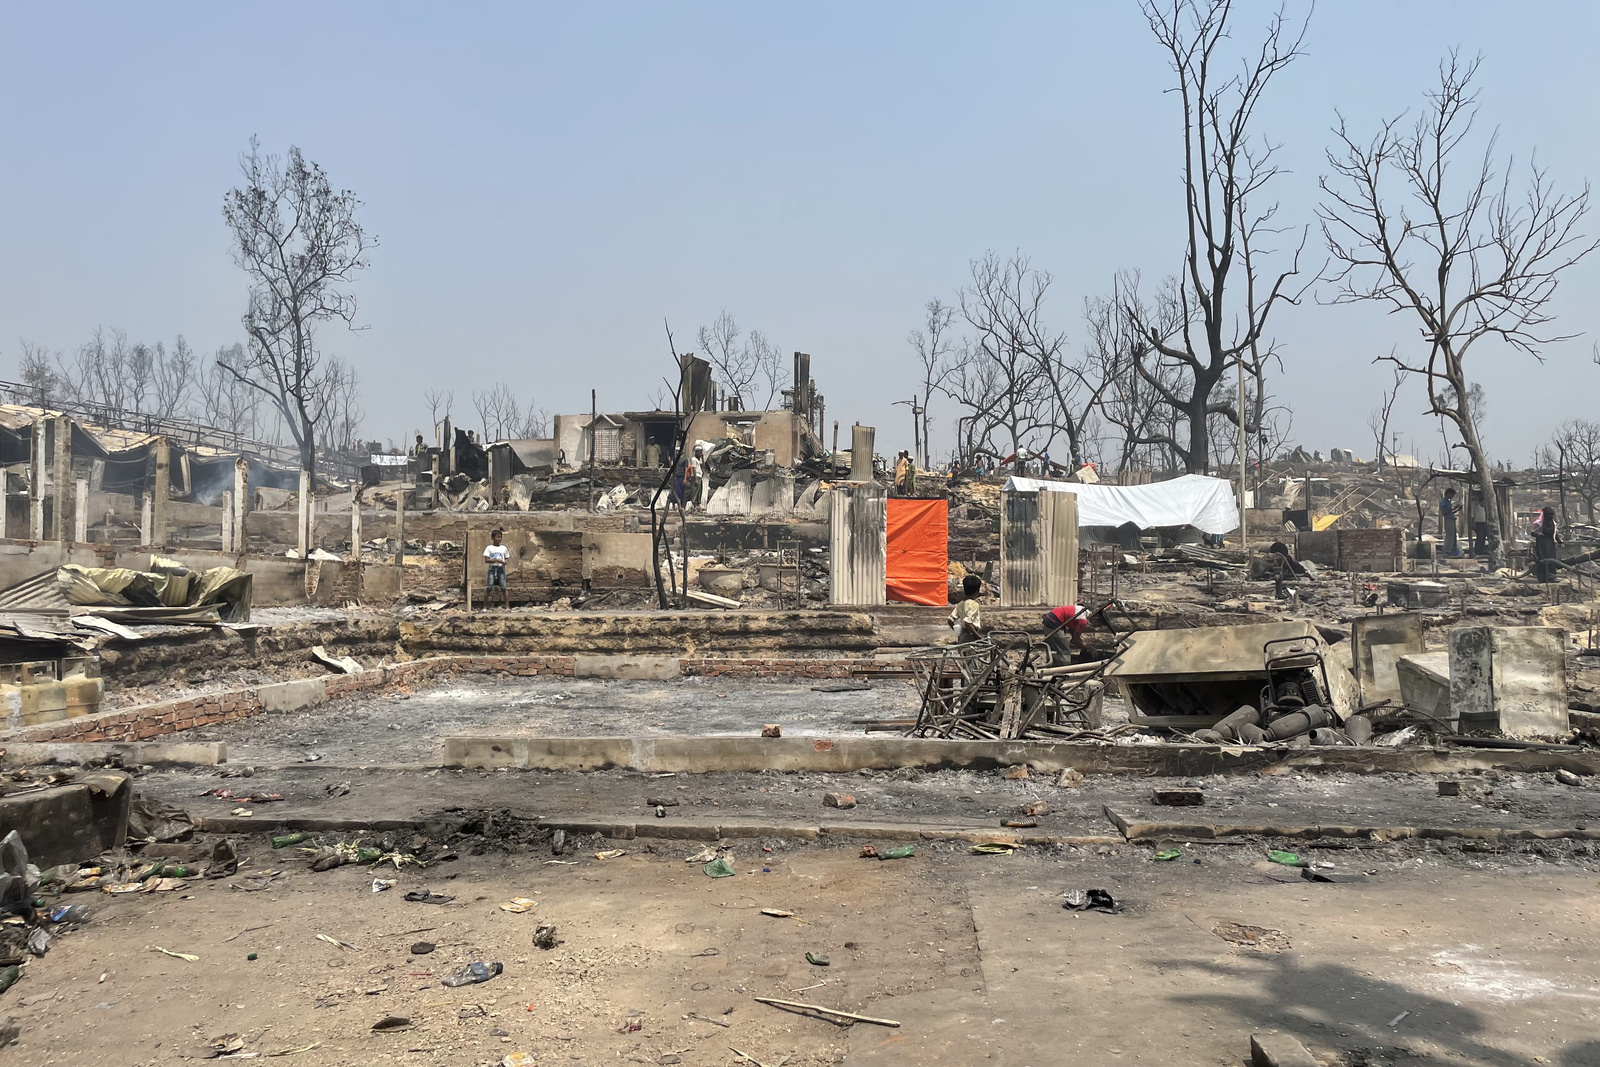 Bangladesh. Fire destroys shelters in Rohingya refugee settlement in Cox's Bazar